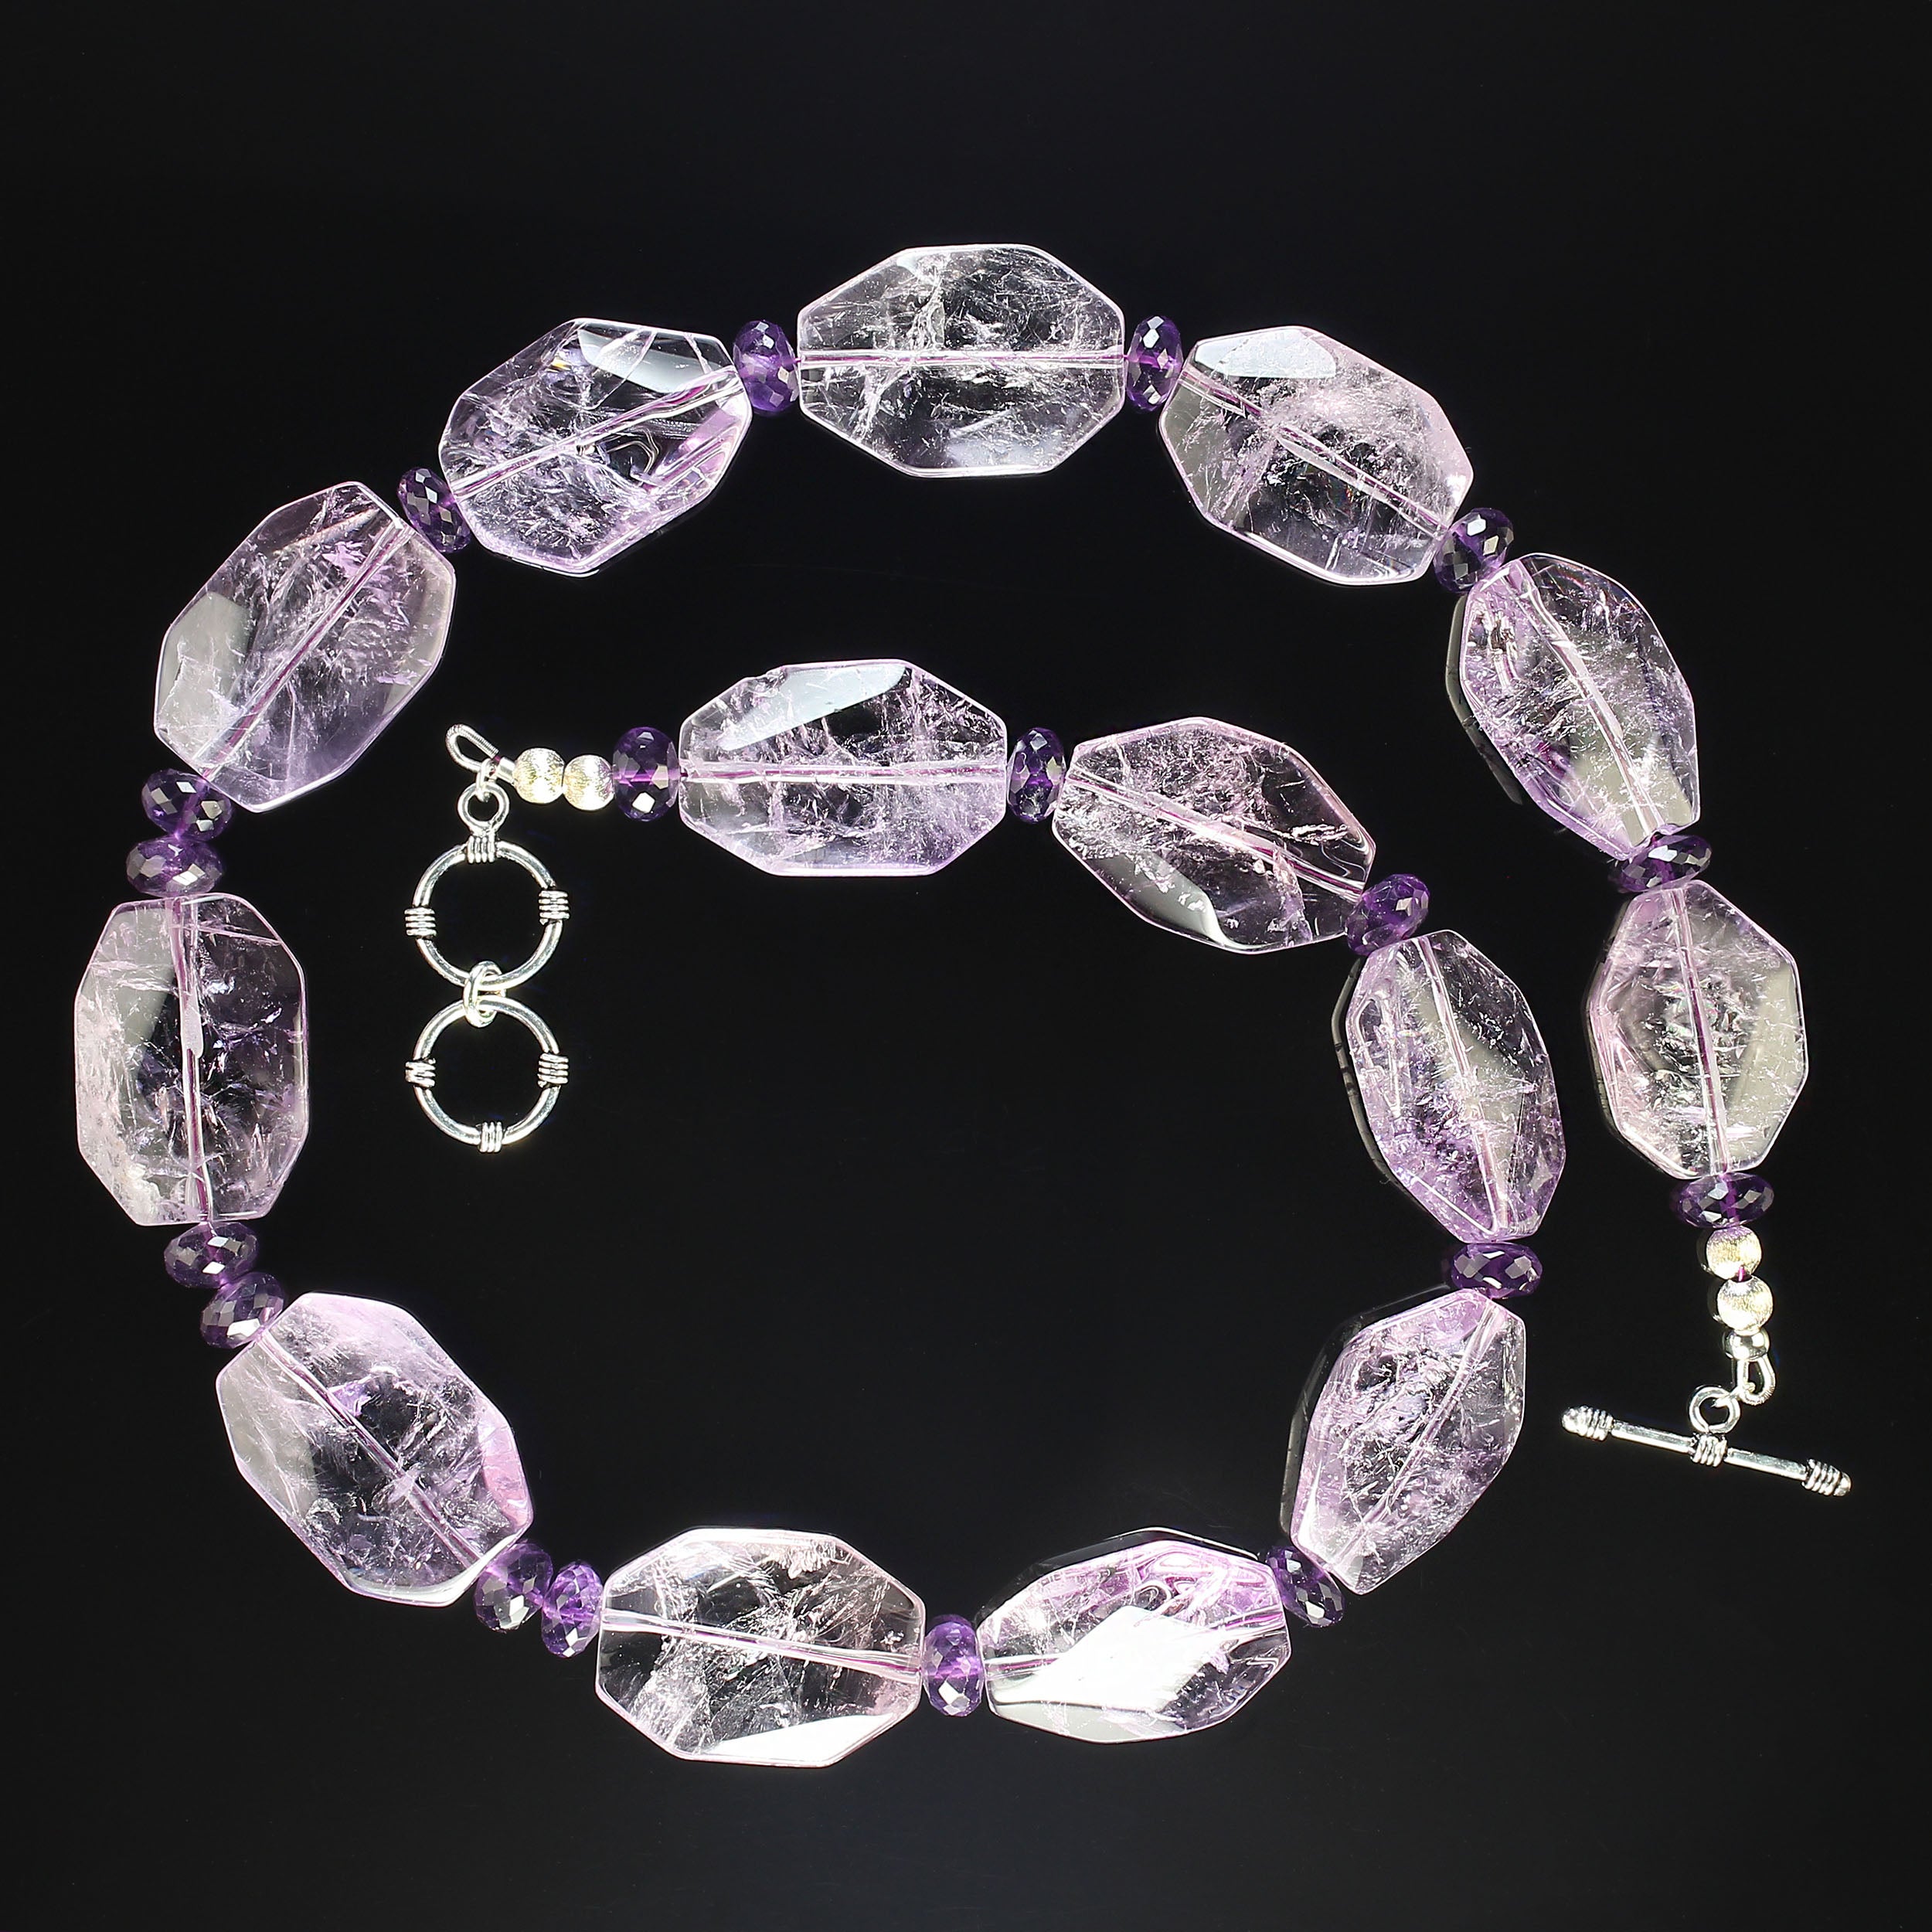 Fascinating and unique necklace of Rose of France Amethyst octagon shaped in highly polished tablets. These gorgeous tablets are accented with darker amethyst faceted rondelles. This one-of-a-kind necklace is secured with a two ring toggle clasp.